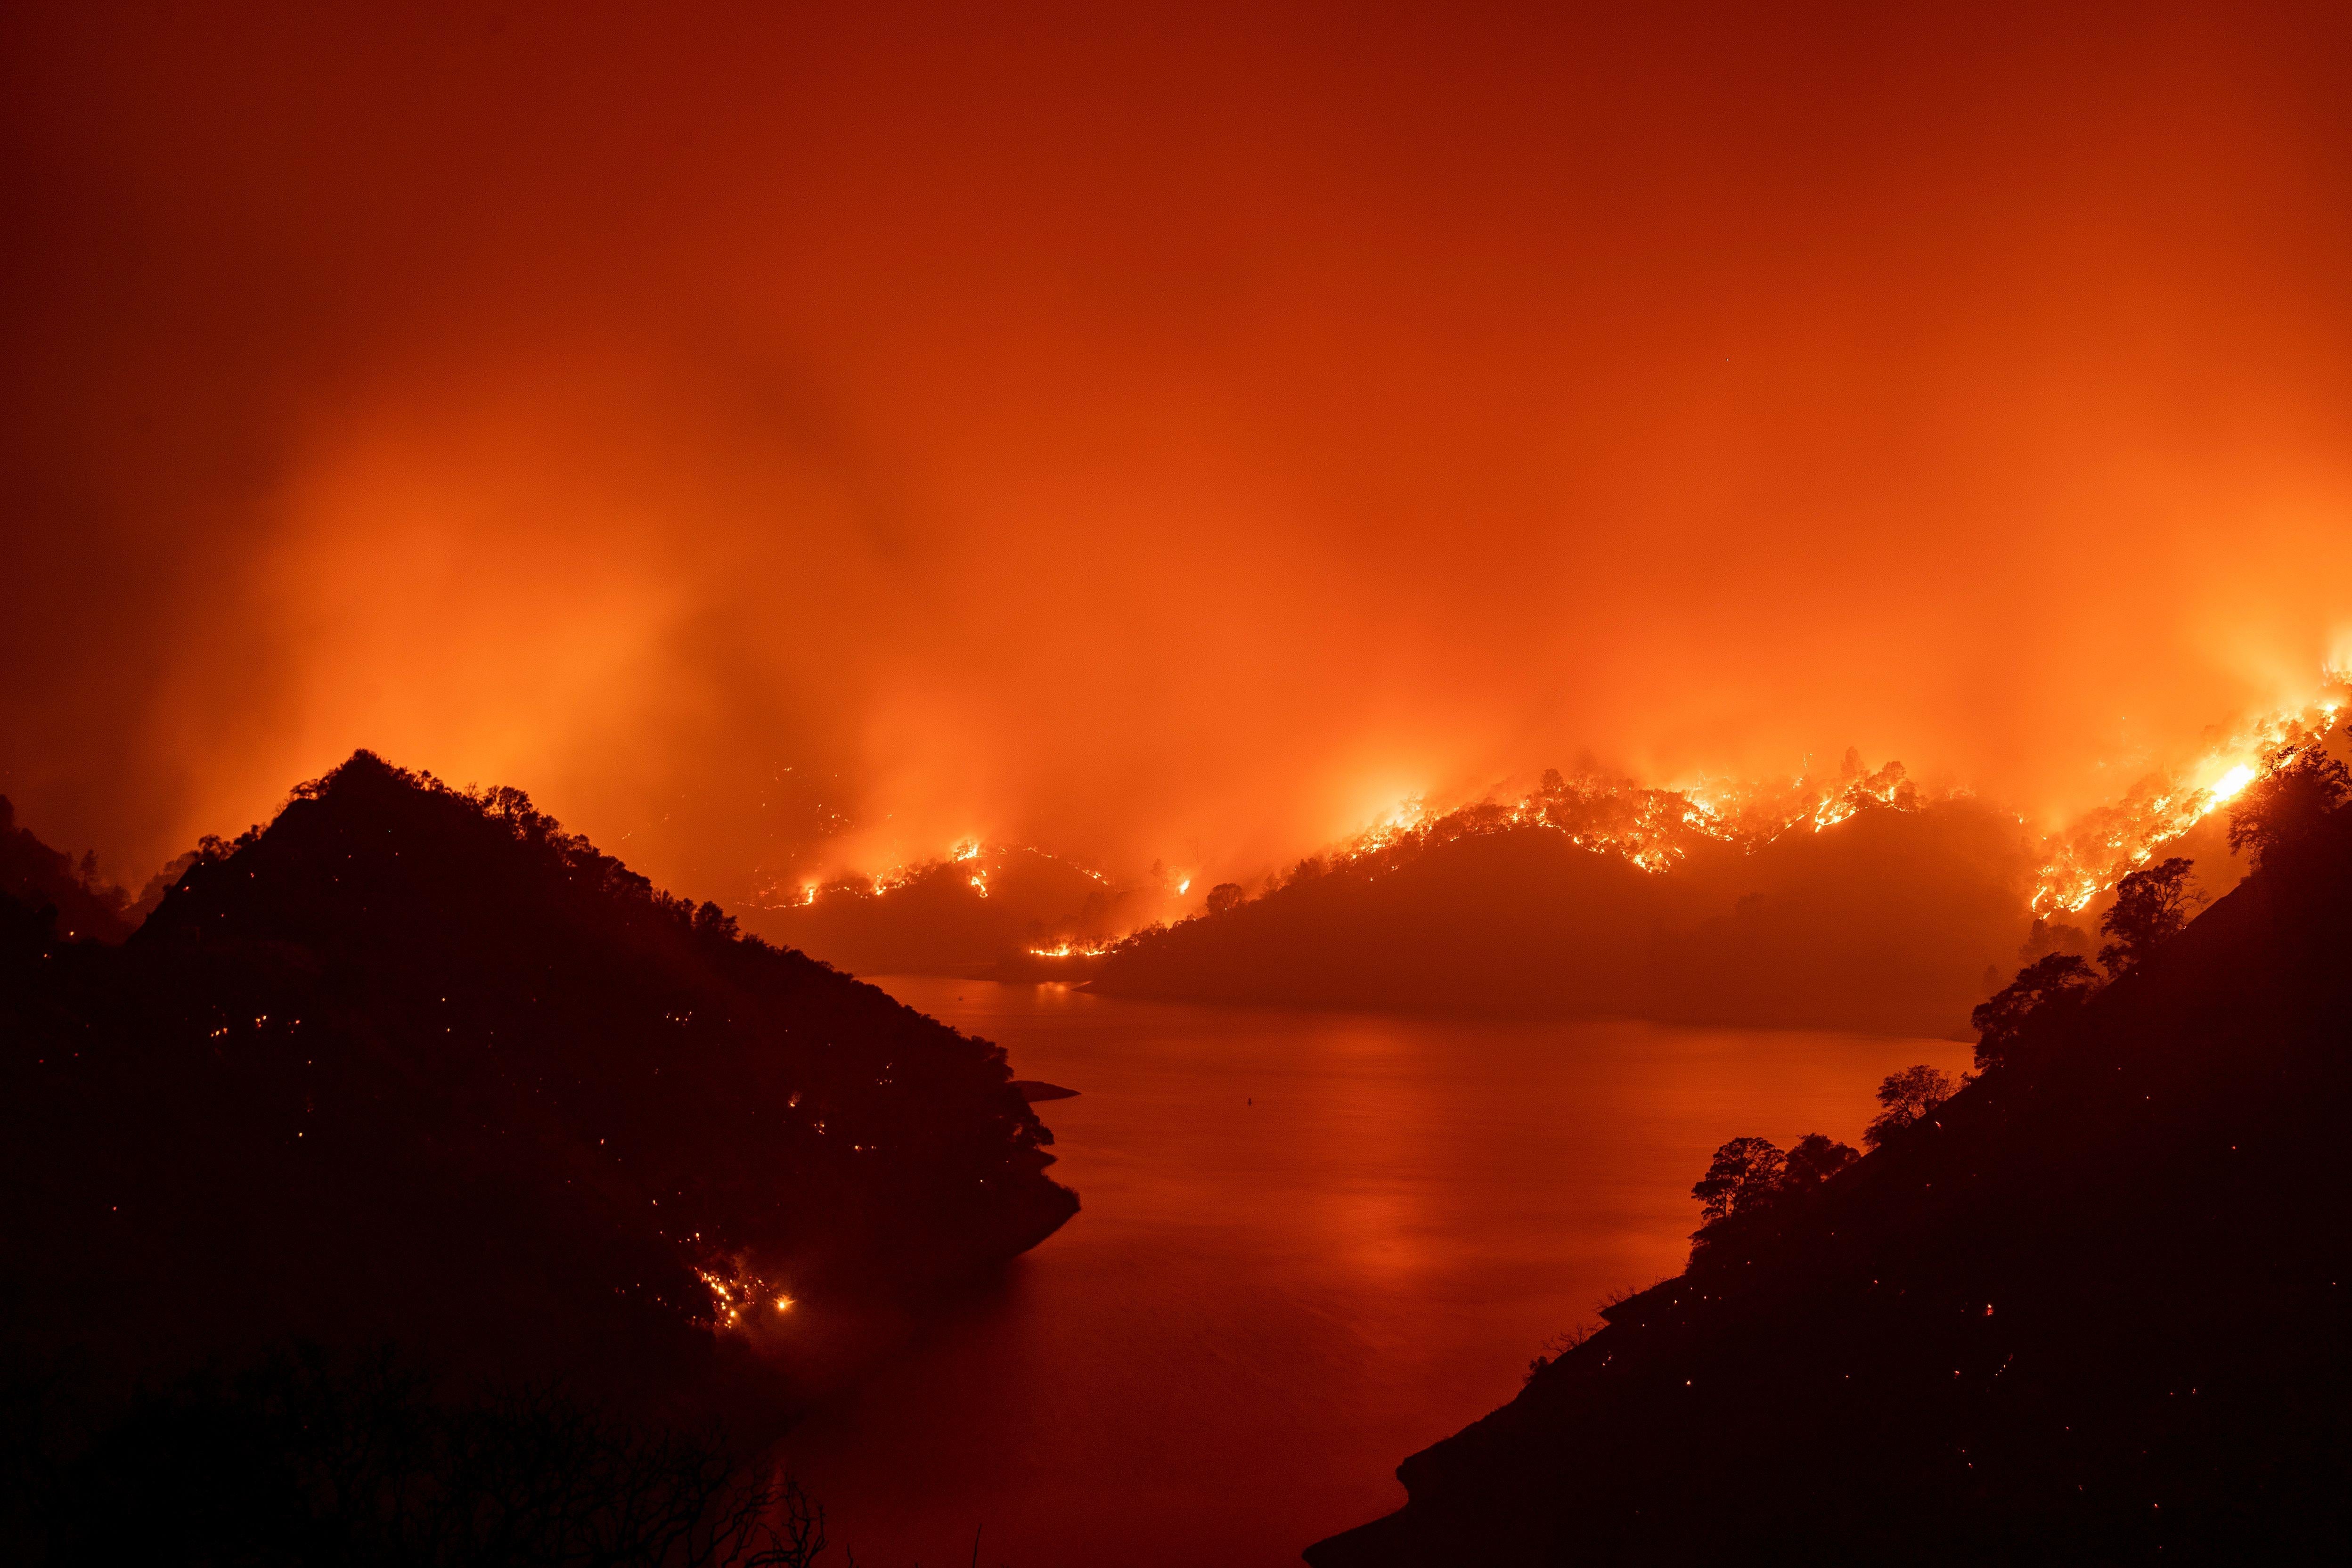 Flames surround Lake Berryessa during a wildfire.